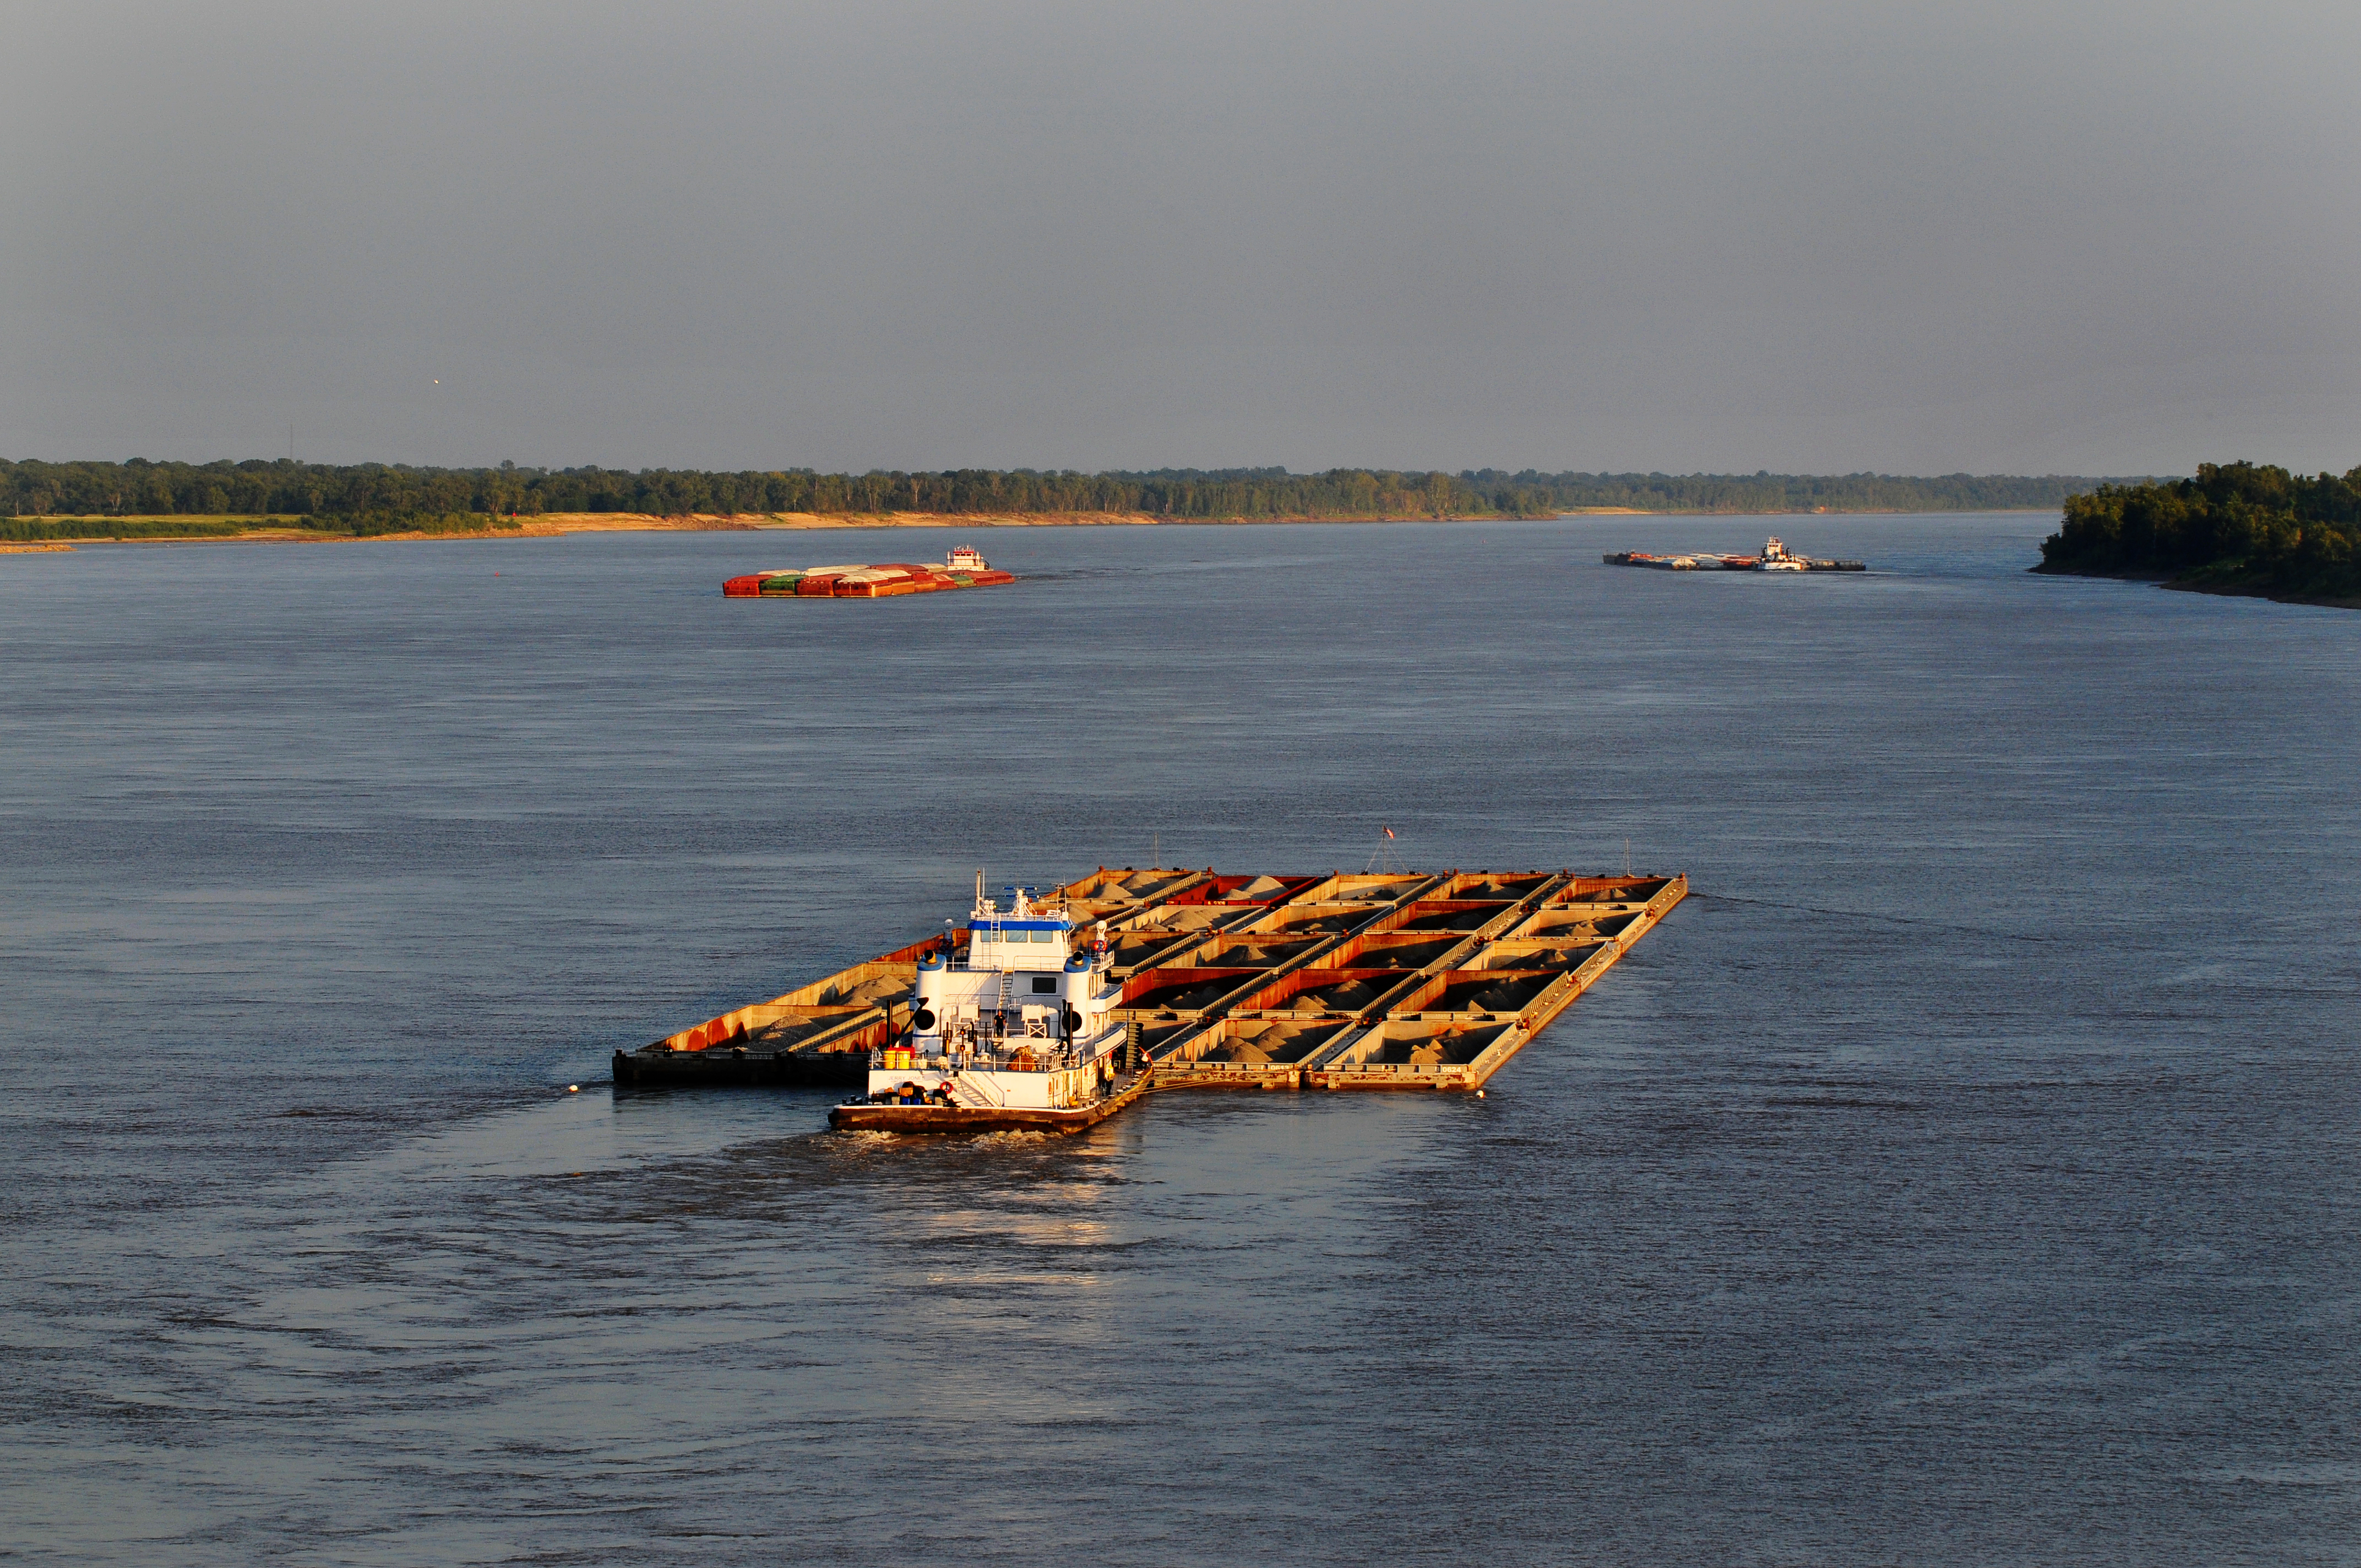 Towboat transporting dry cargo